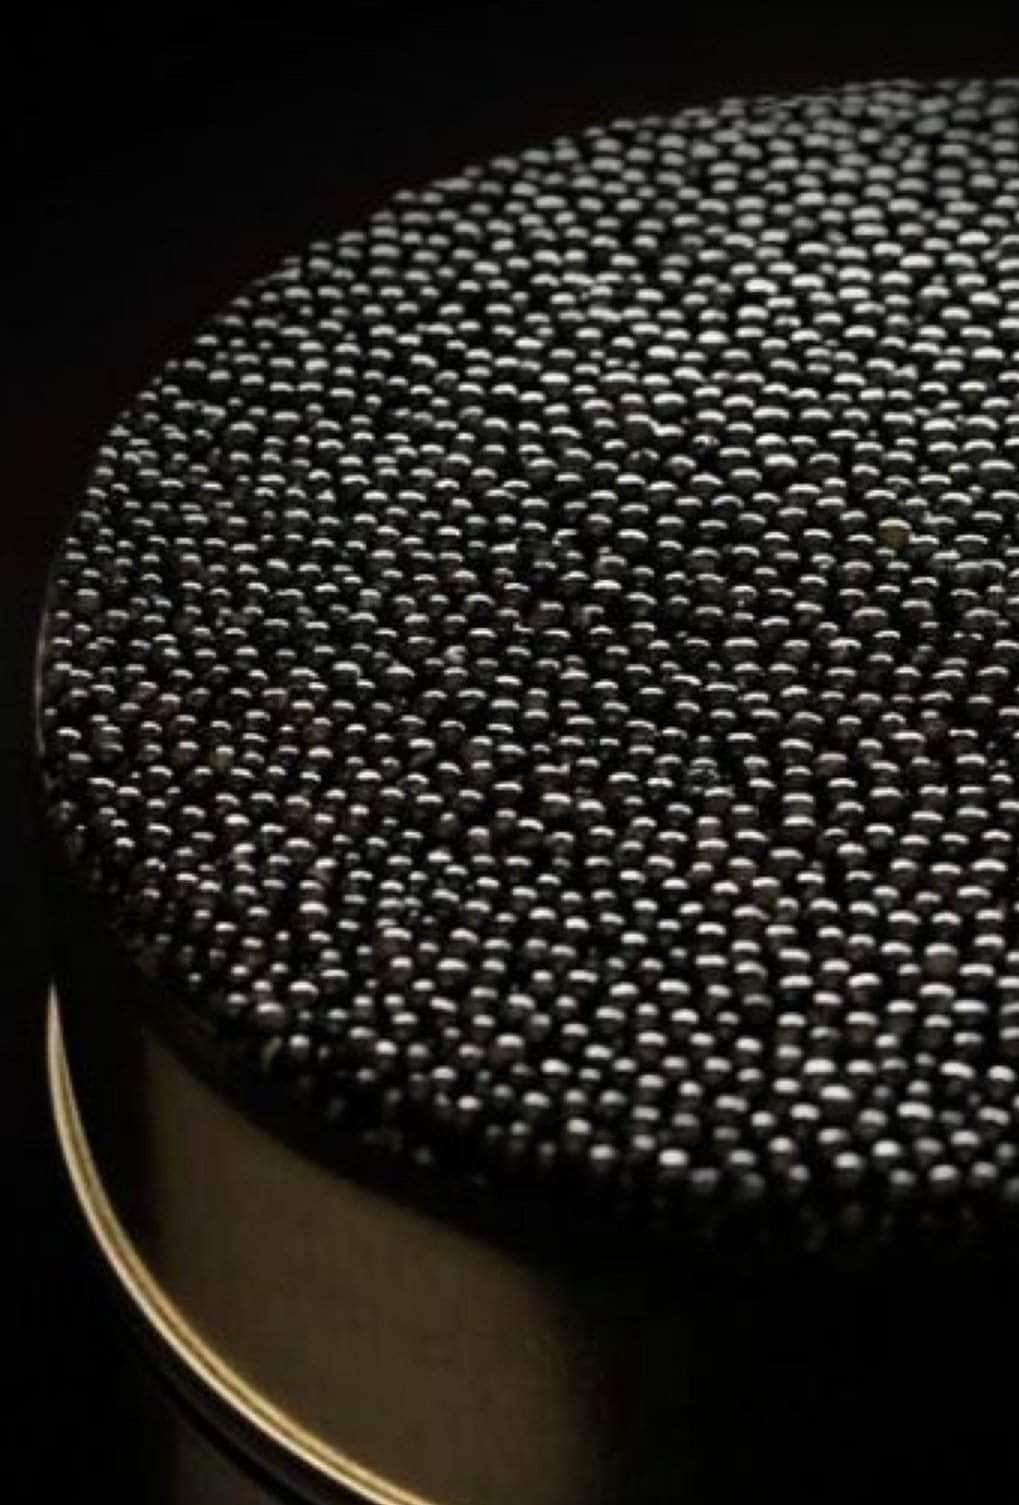 WHAT IS AMERICAN CAVIAR?